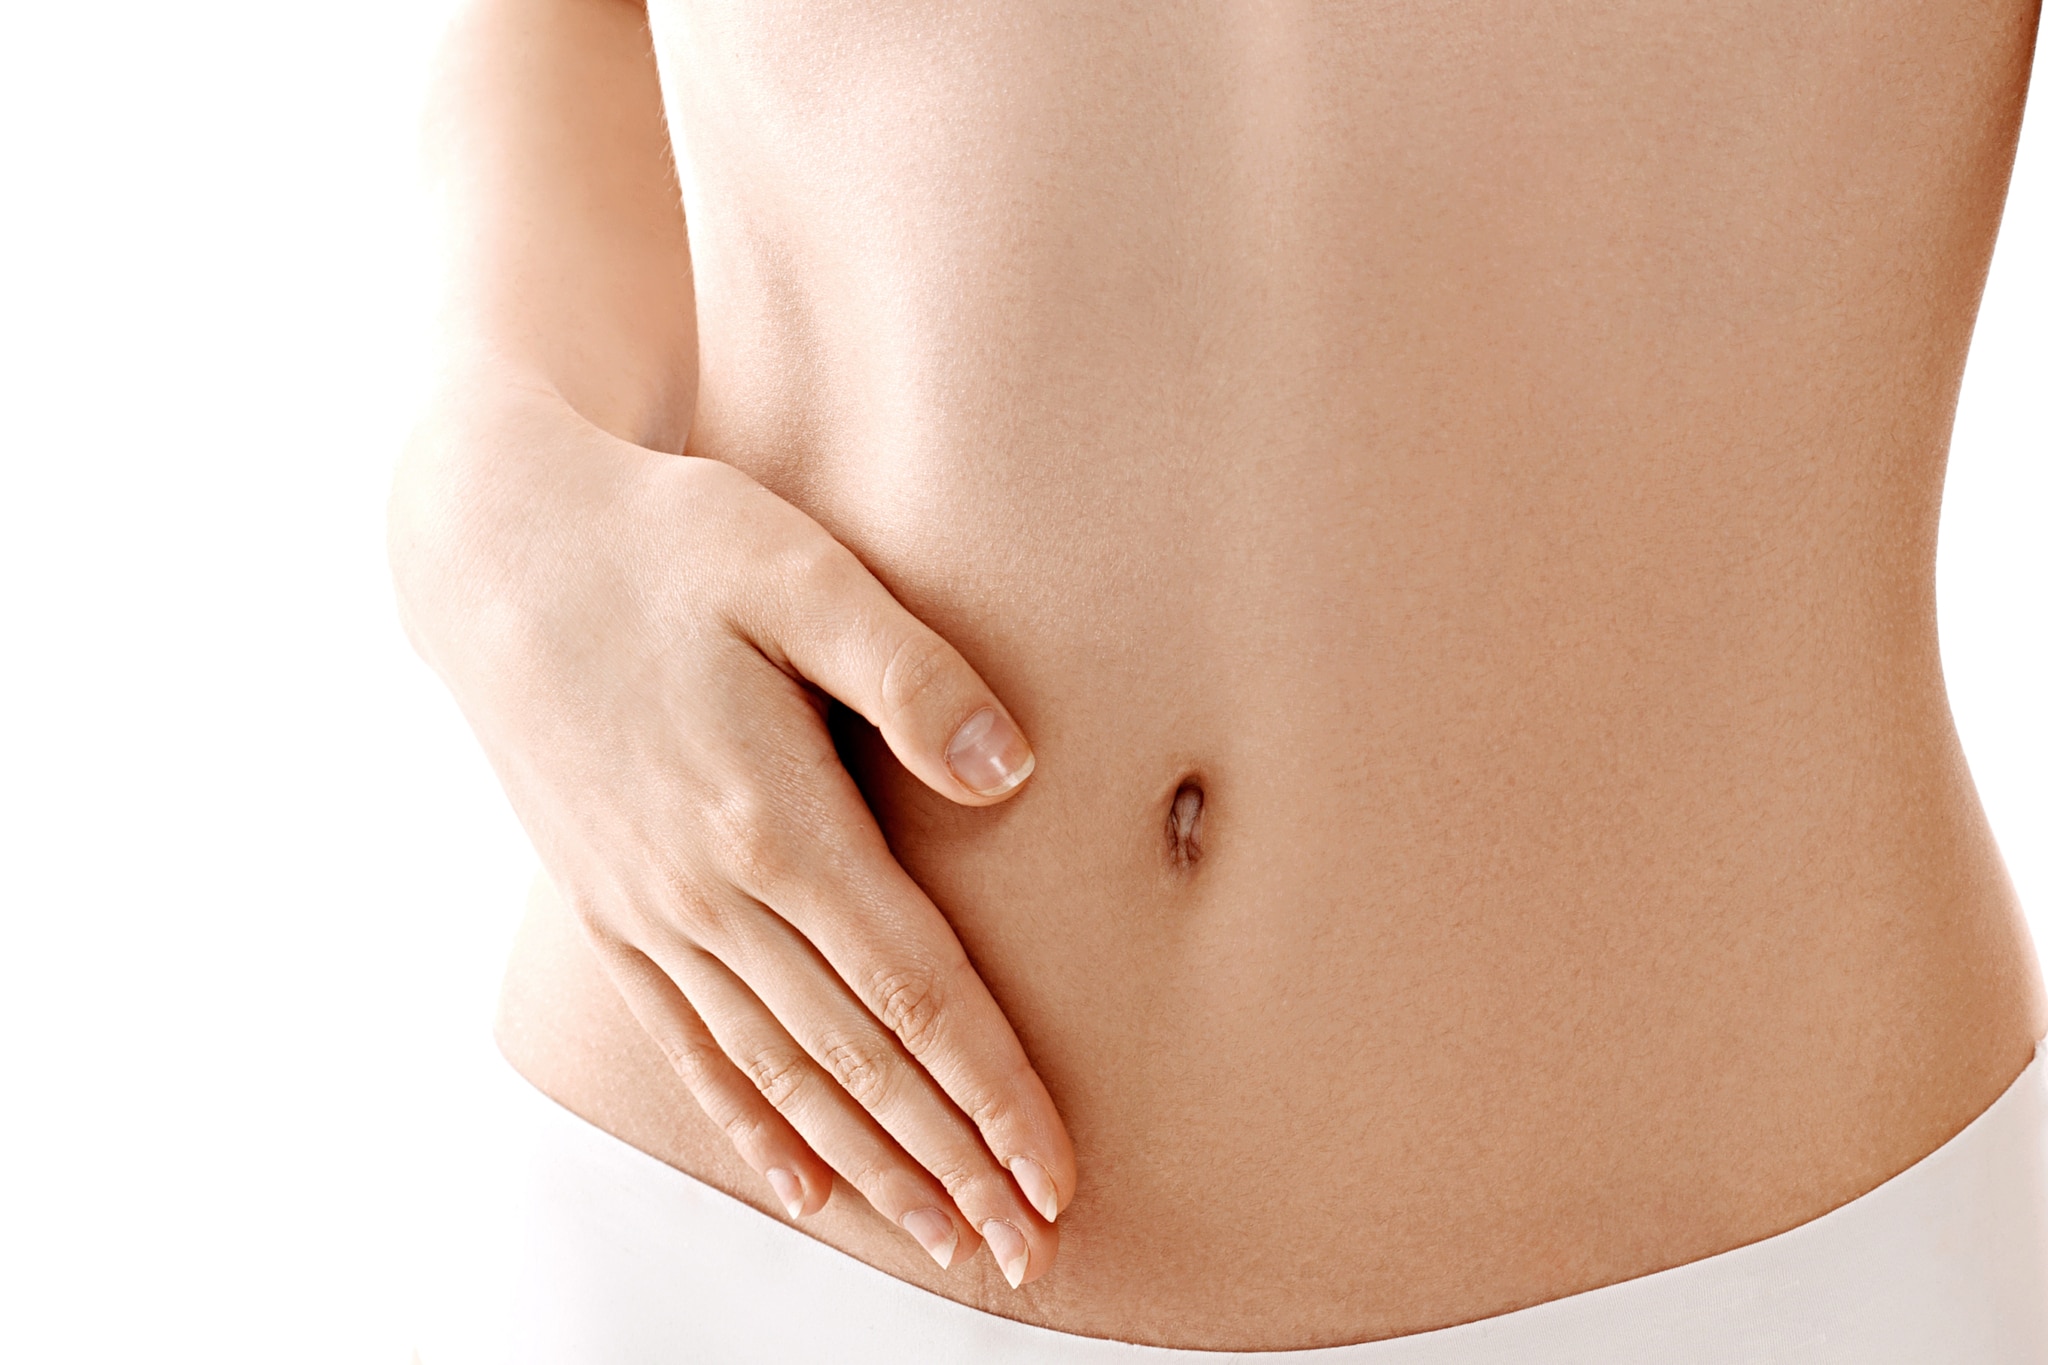 4 Tips for a Smooth Tummy Tuck Recovery